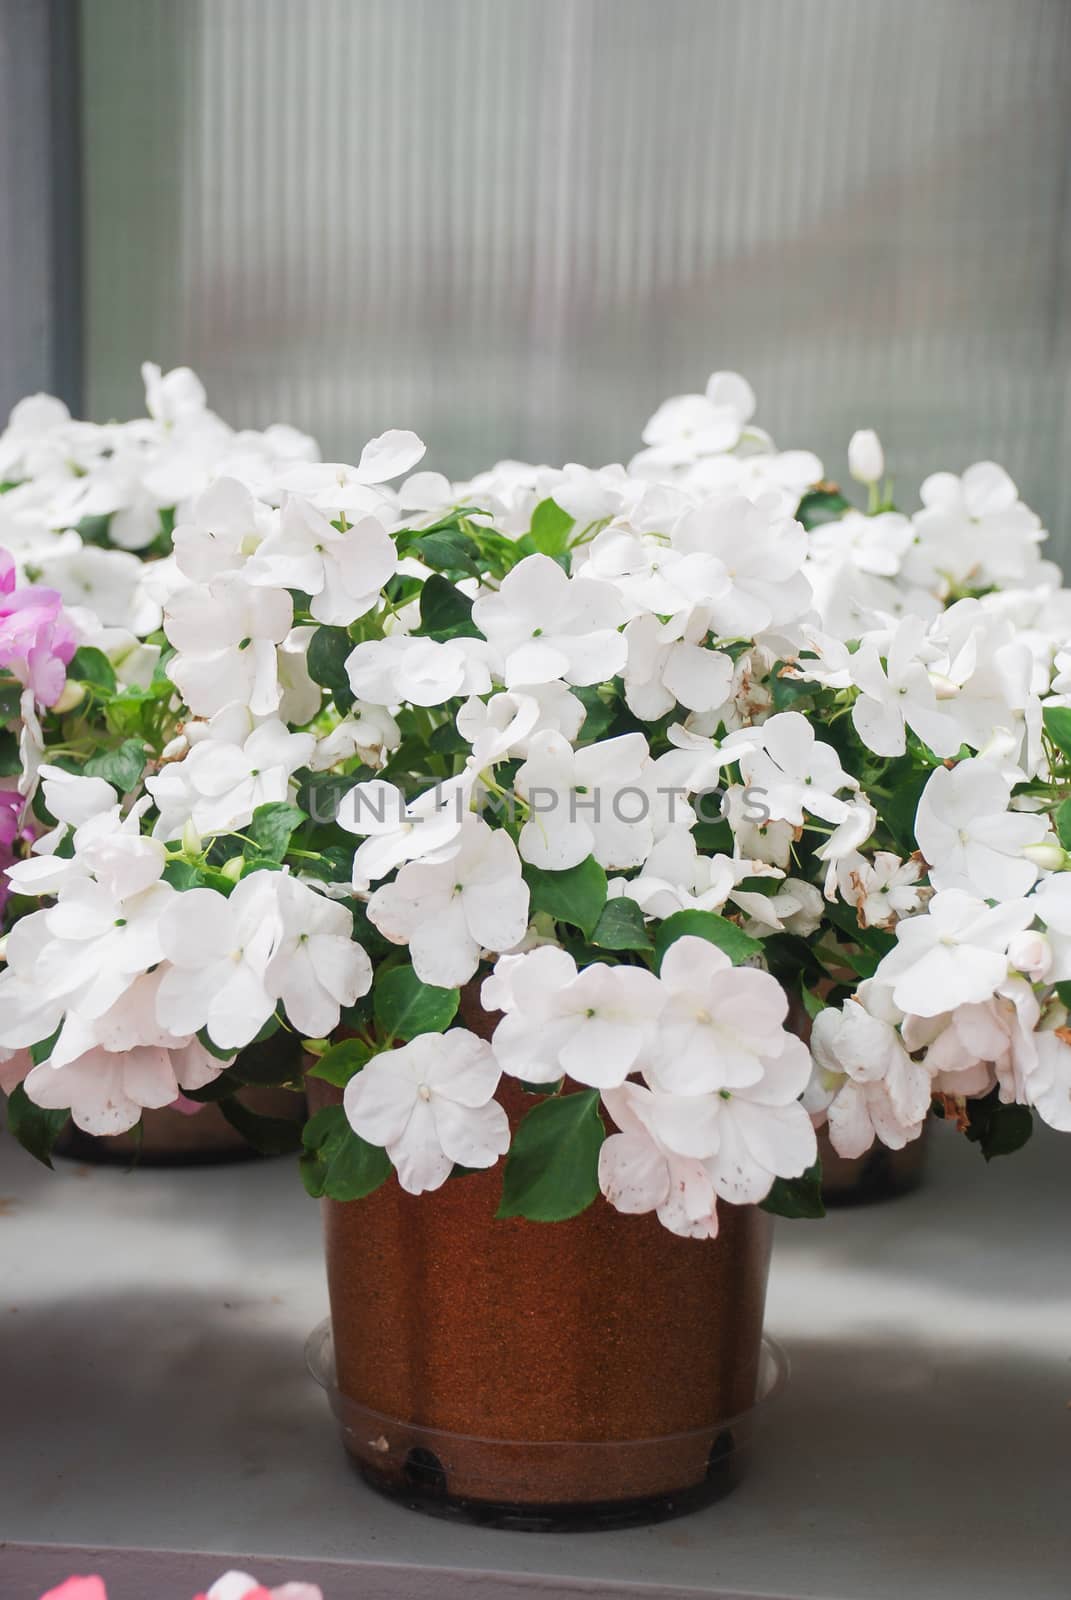 white impatiens in potted, scientific name Impatiens walleriana  by yuiyuize